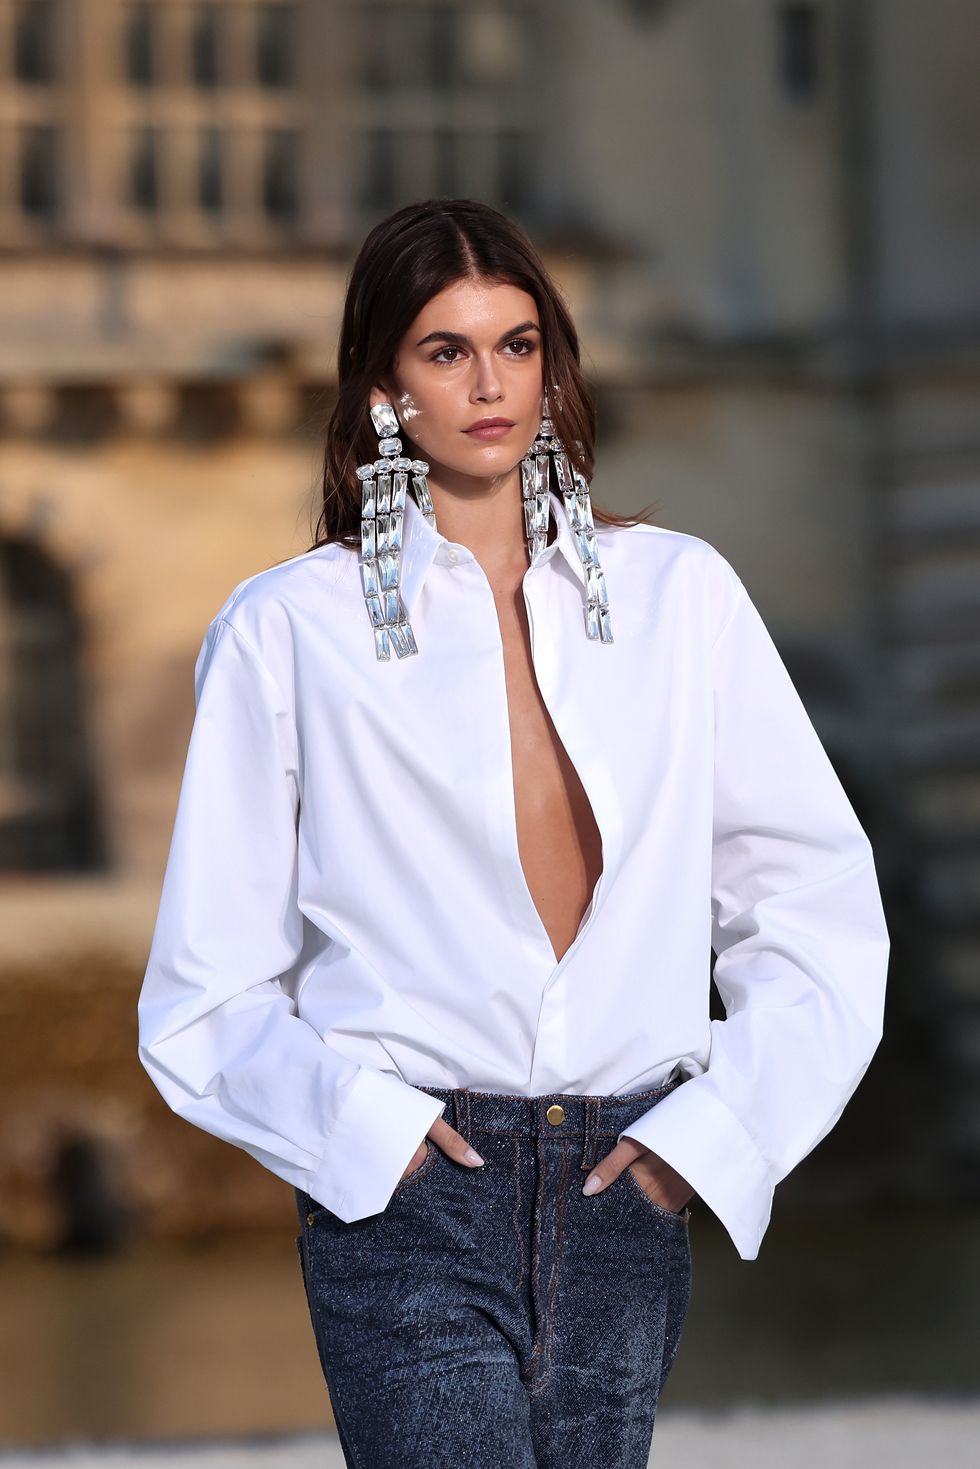 Kaia Gerber opens Valentino Couture show in unbuttoned shirt